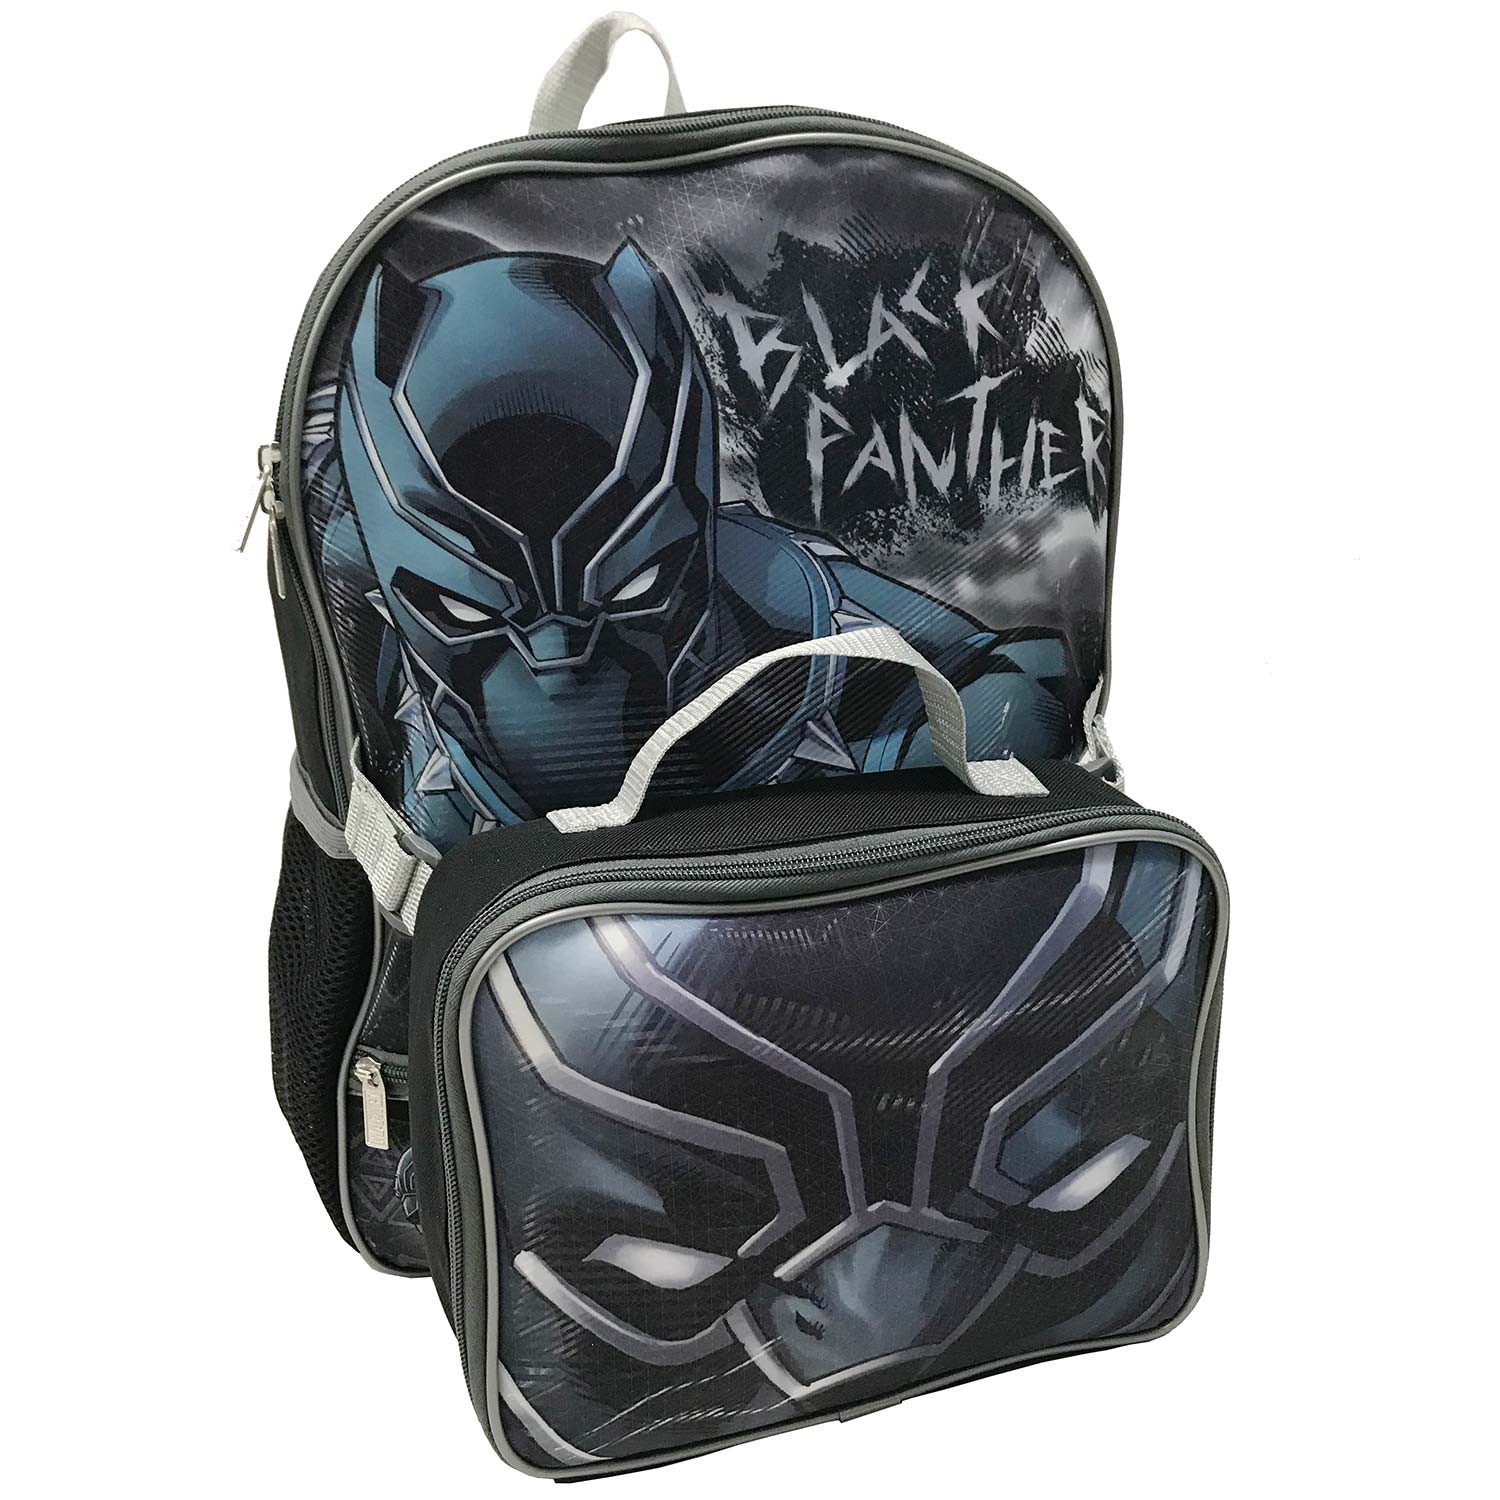 Black Panther Backpack and Lunch Kit